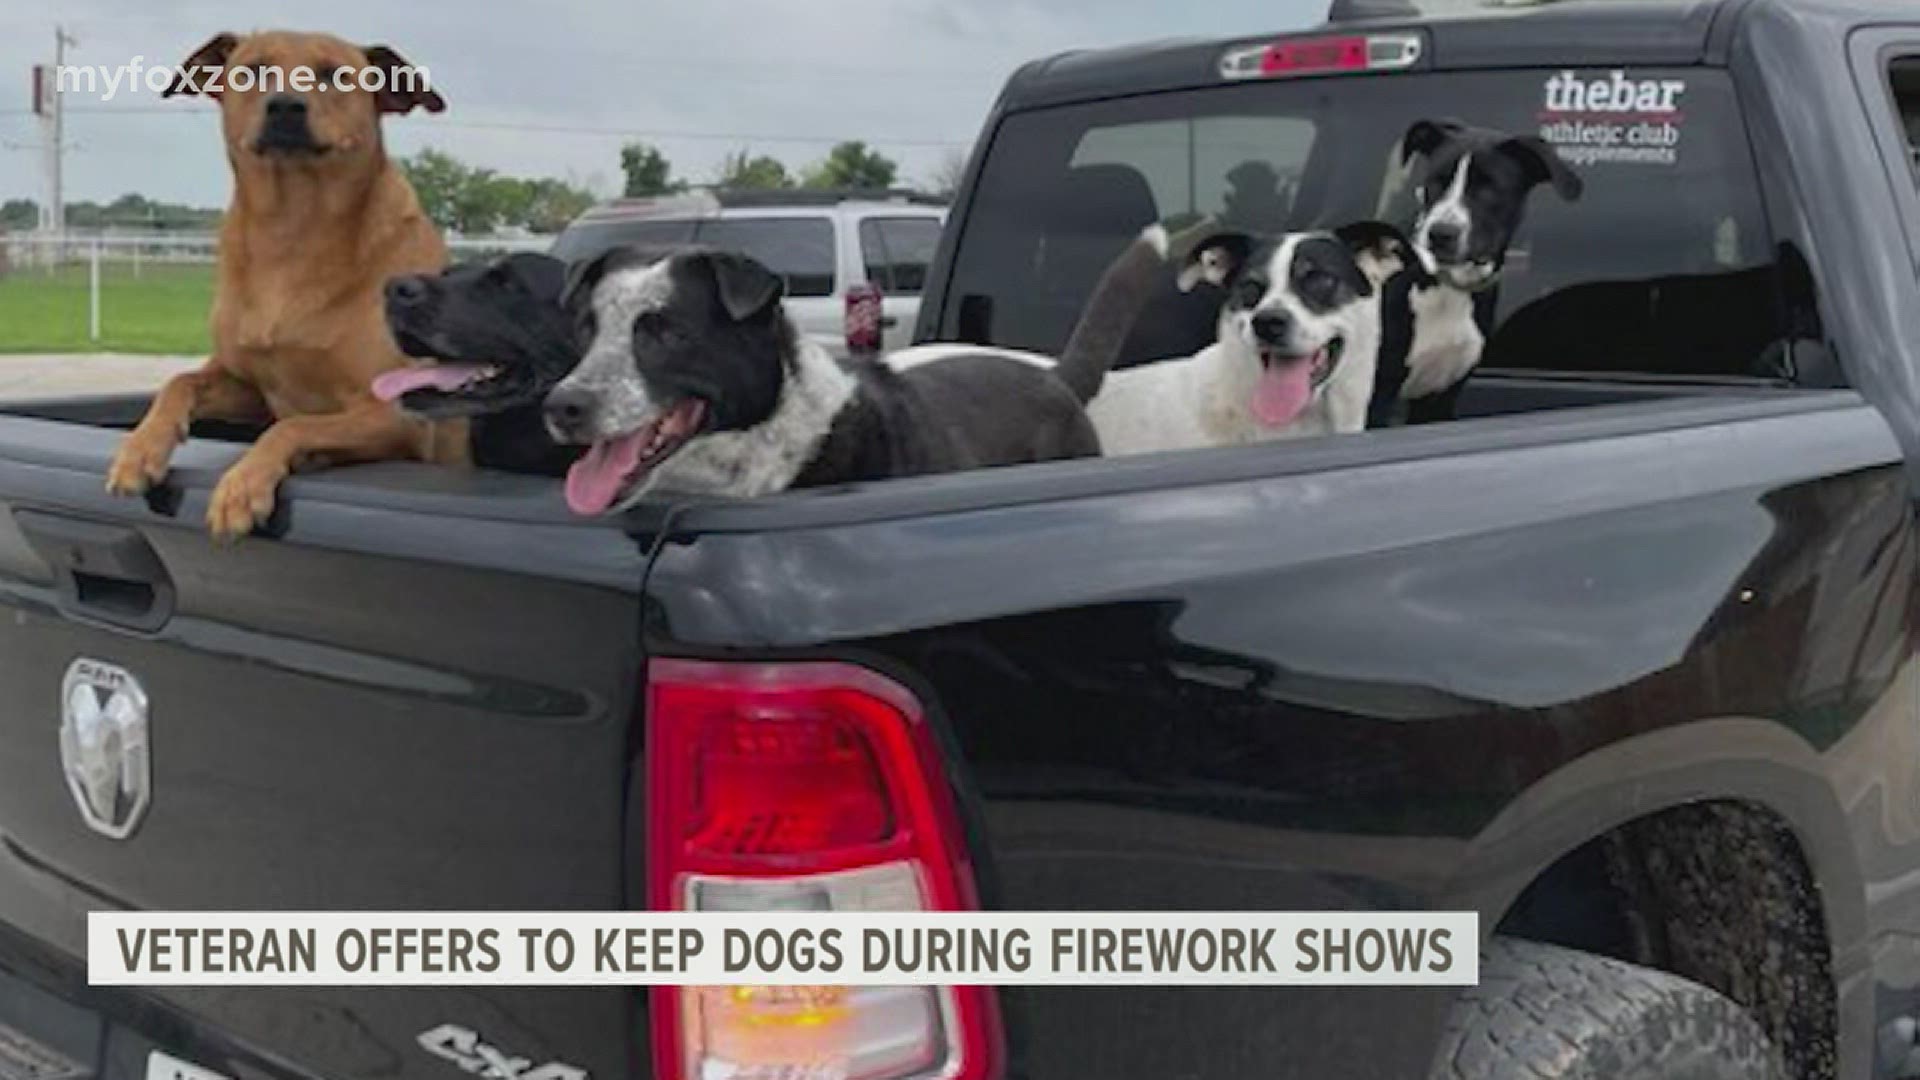 A San Angelo native is opening up his home to others' dogs during firework shows to help keep them safe, calm and protected.